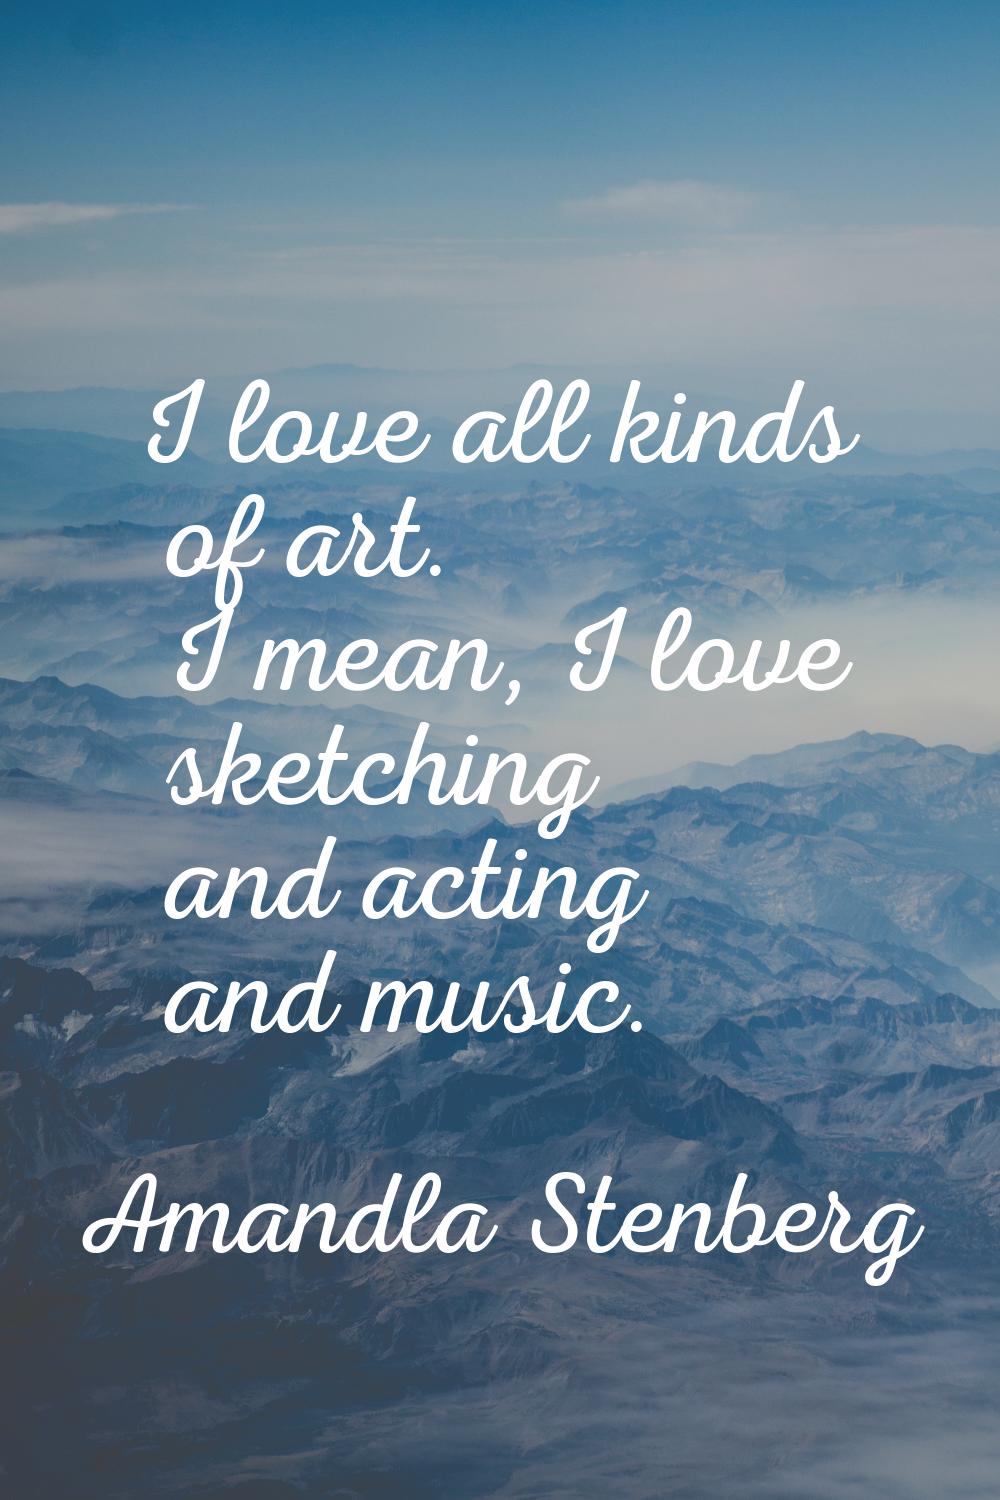 I love all kinds of art. I mean, I love sketching and acting and music.